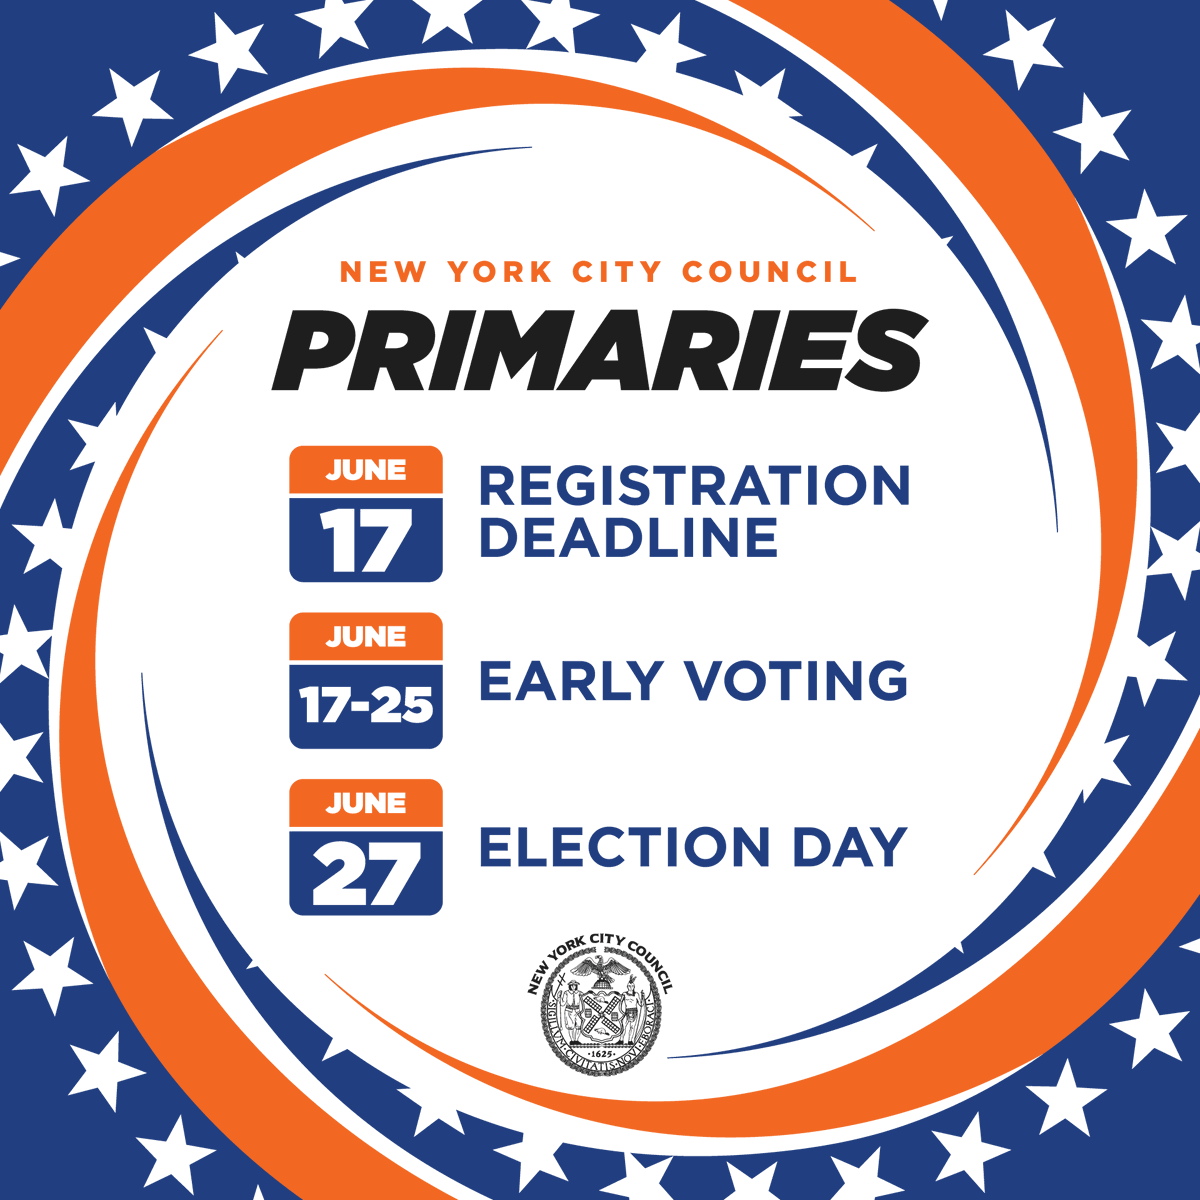 New Yorkers: Early voting for the City Council primaries begins THIS SATURDAY!  

Register by June 17th at https://t.co/xFICHKNNAC https://t.co/18hy4IRUAT